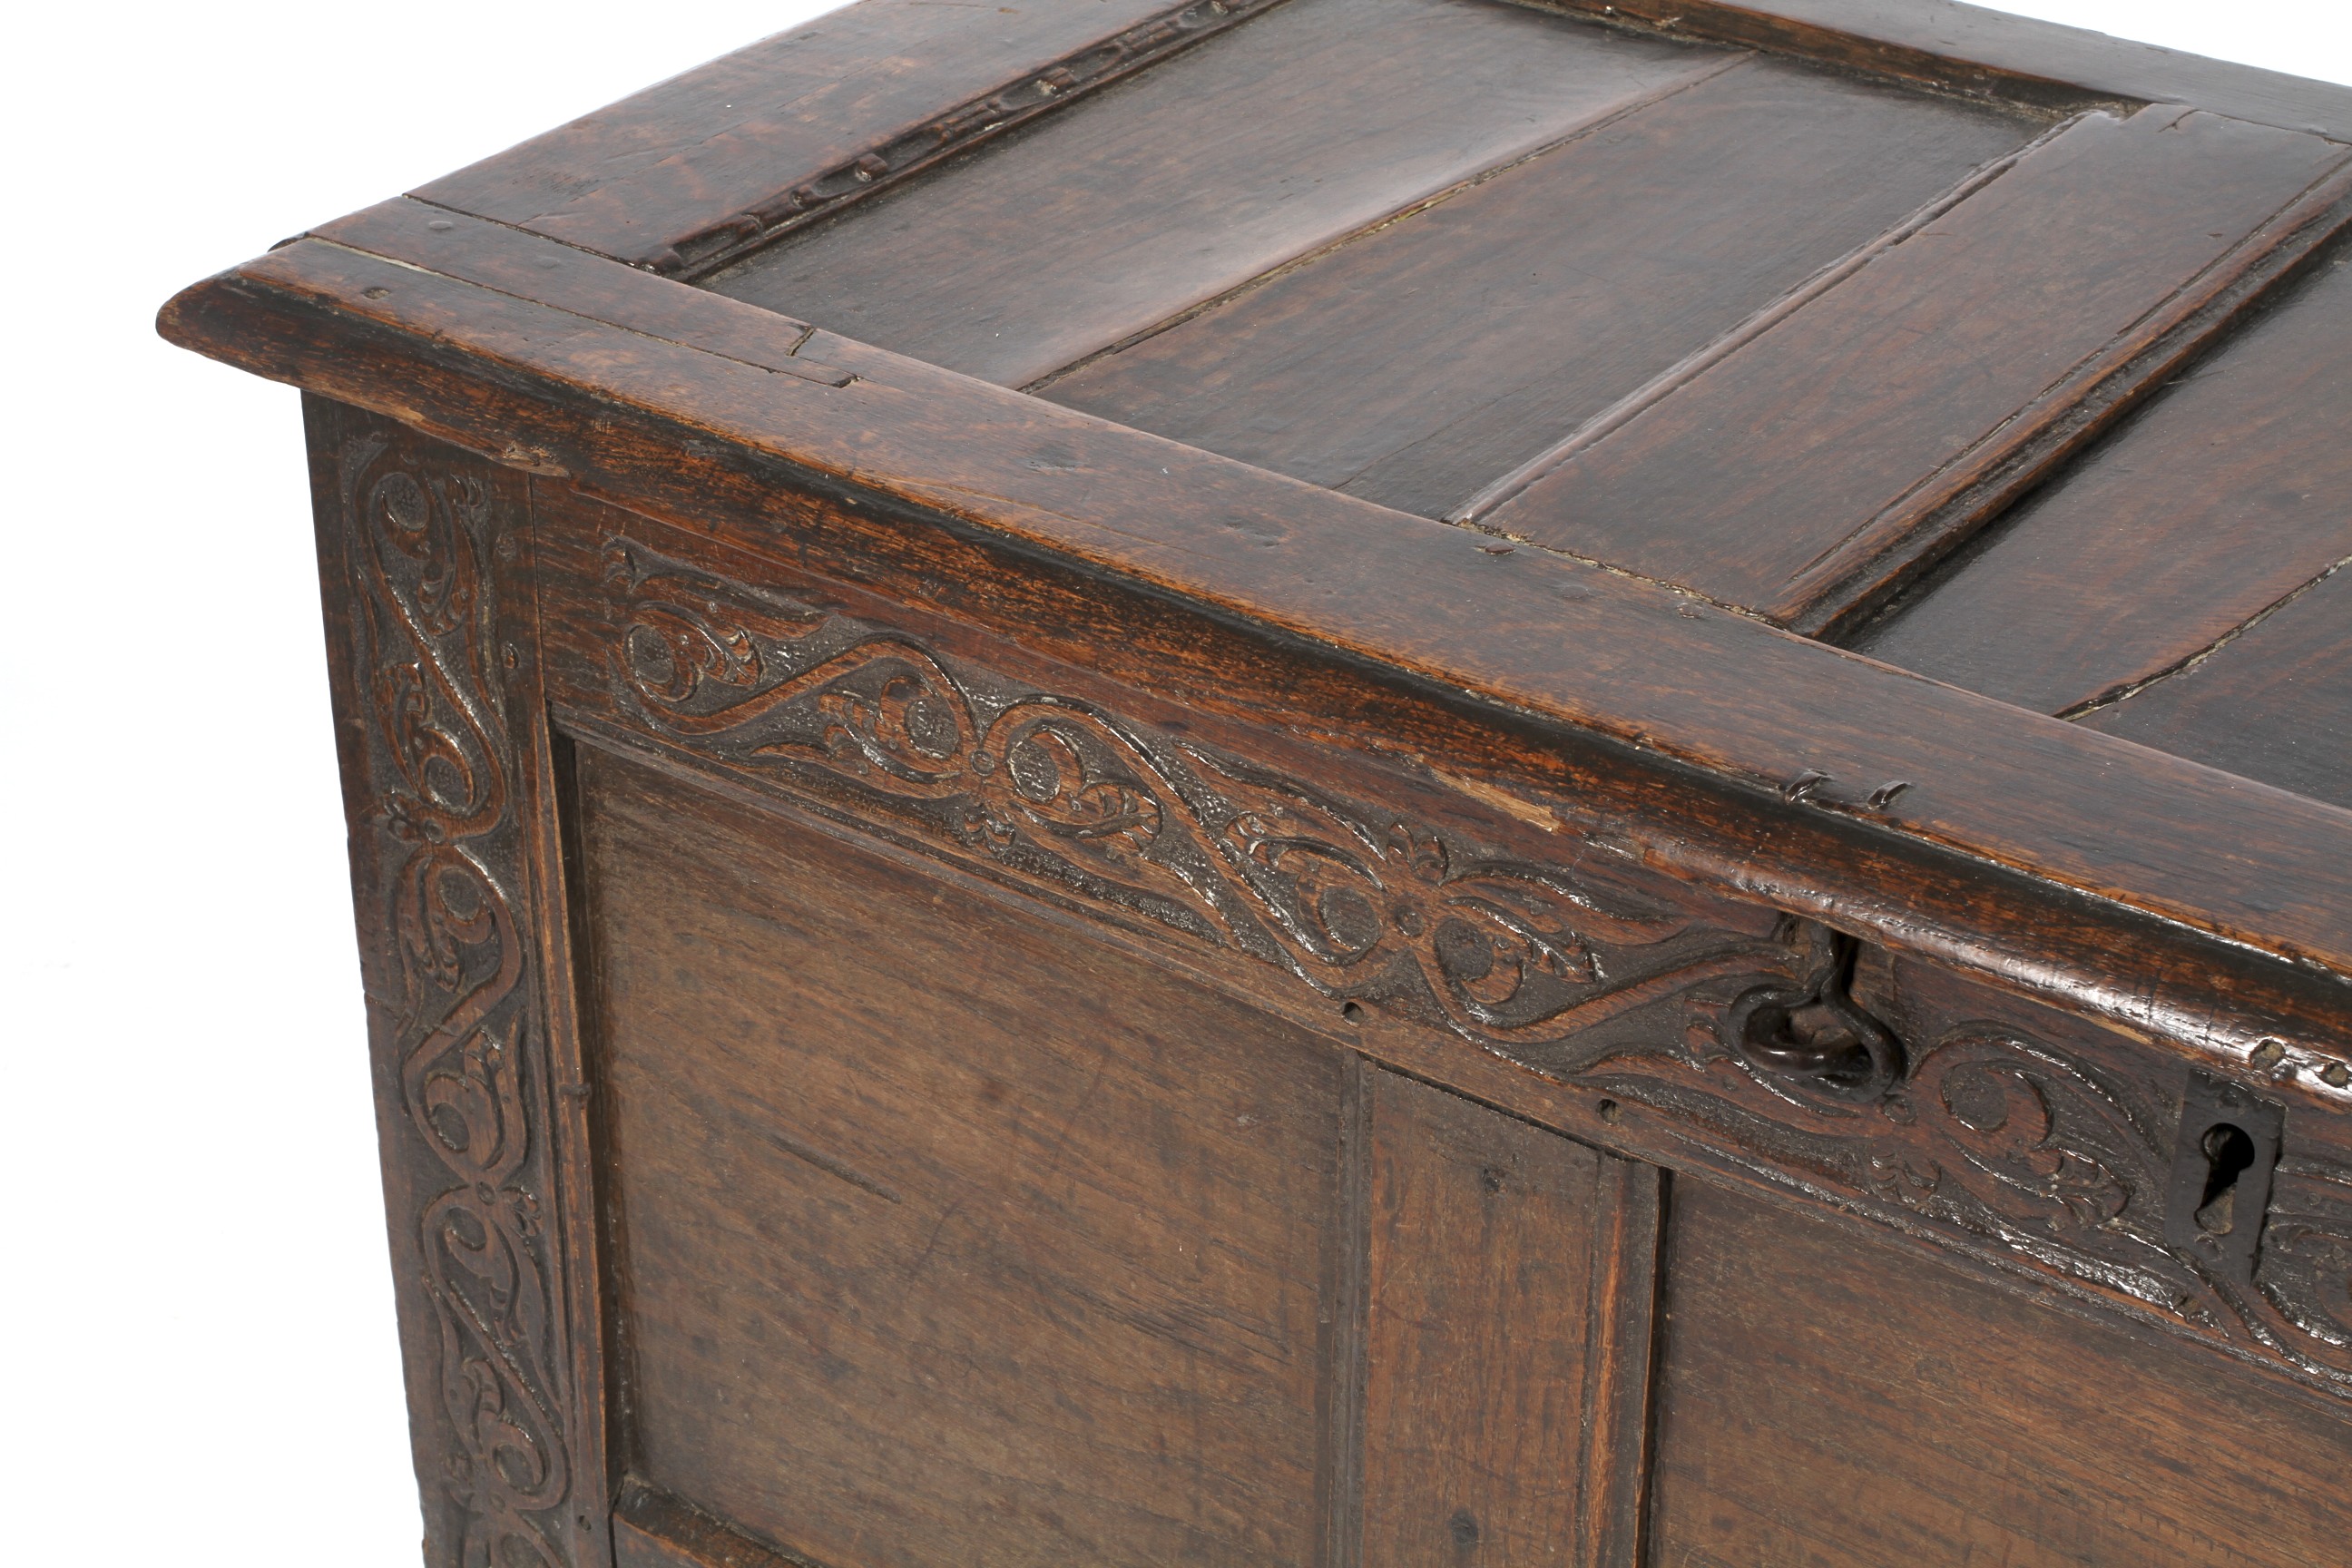 A panelled and carved oak coffer, late 17th century. - Image 2 of 2